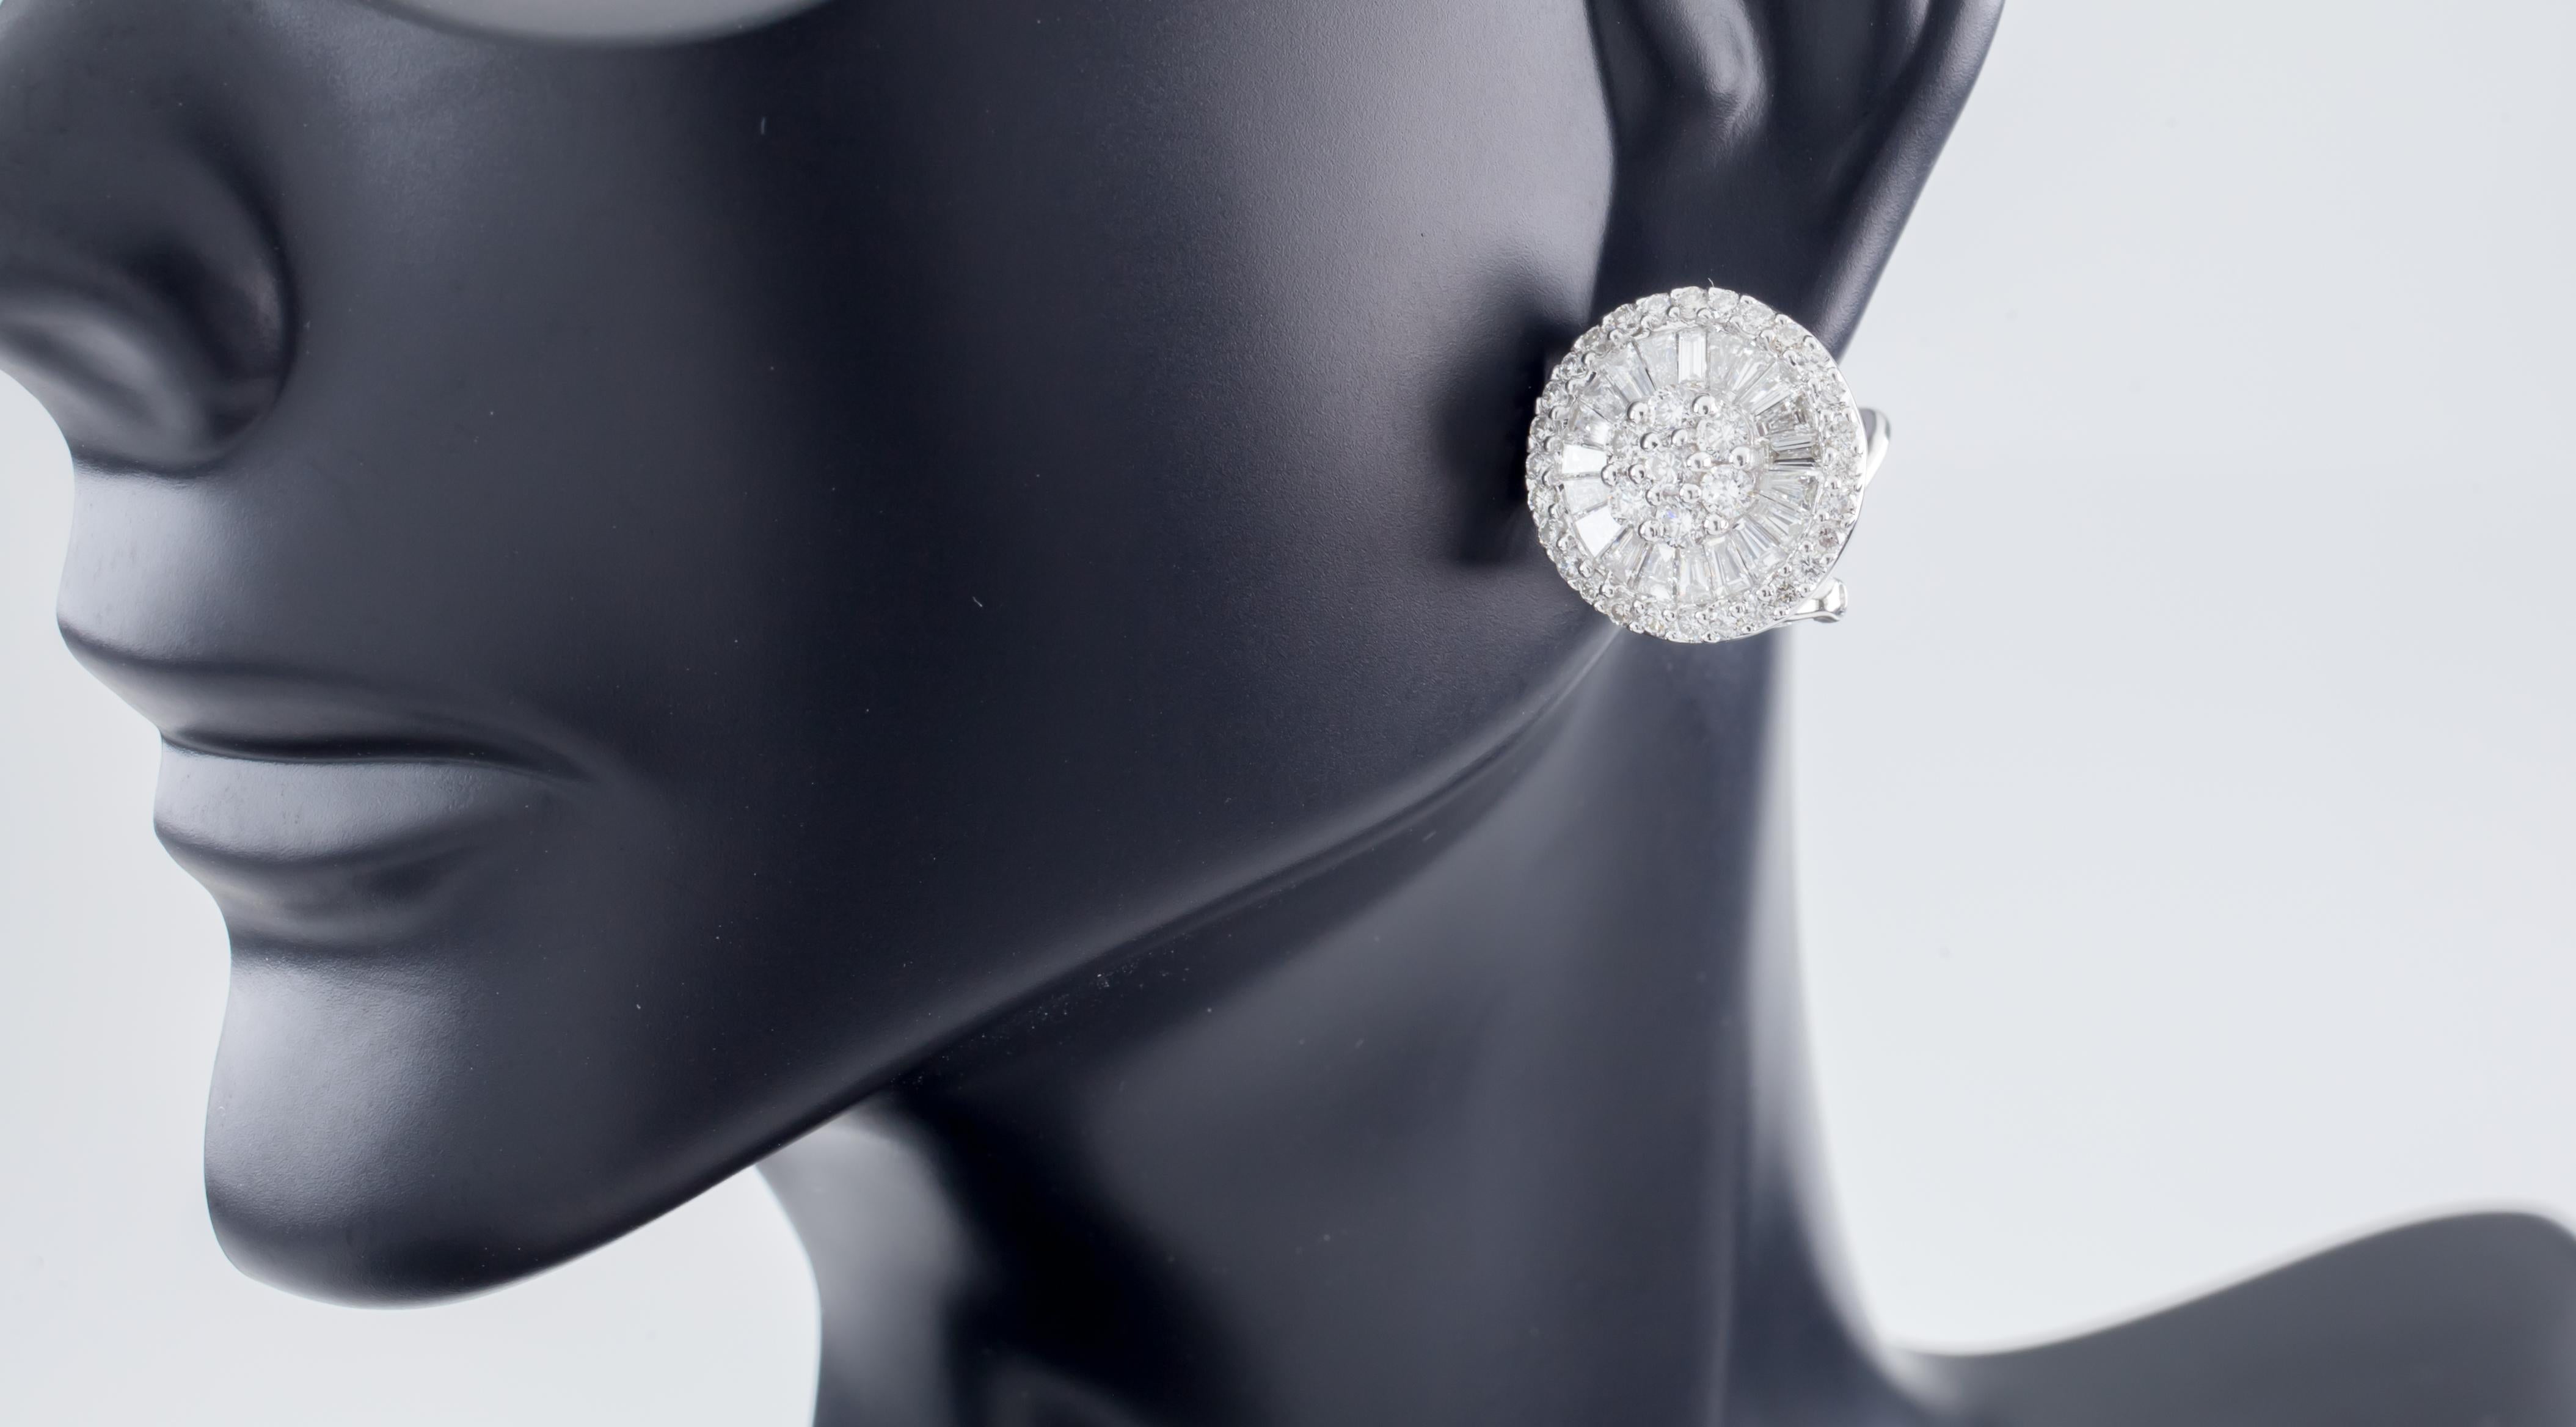 Feature Round Diamond Floret Surrounded by Invisible Set Baguette Ballerina and Round Diamond Bezel
Setting is approximately 19 mm in Diameter
Feature Stud Back with Omega Clasp
Total Diamond Weight = Appx 2.43 ct
Average Color = G
Average Clarity =